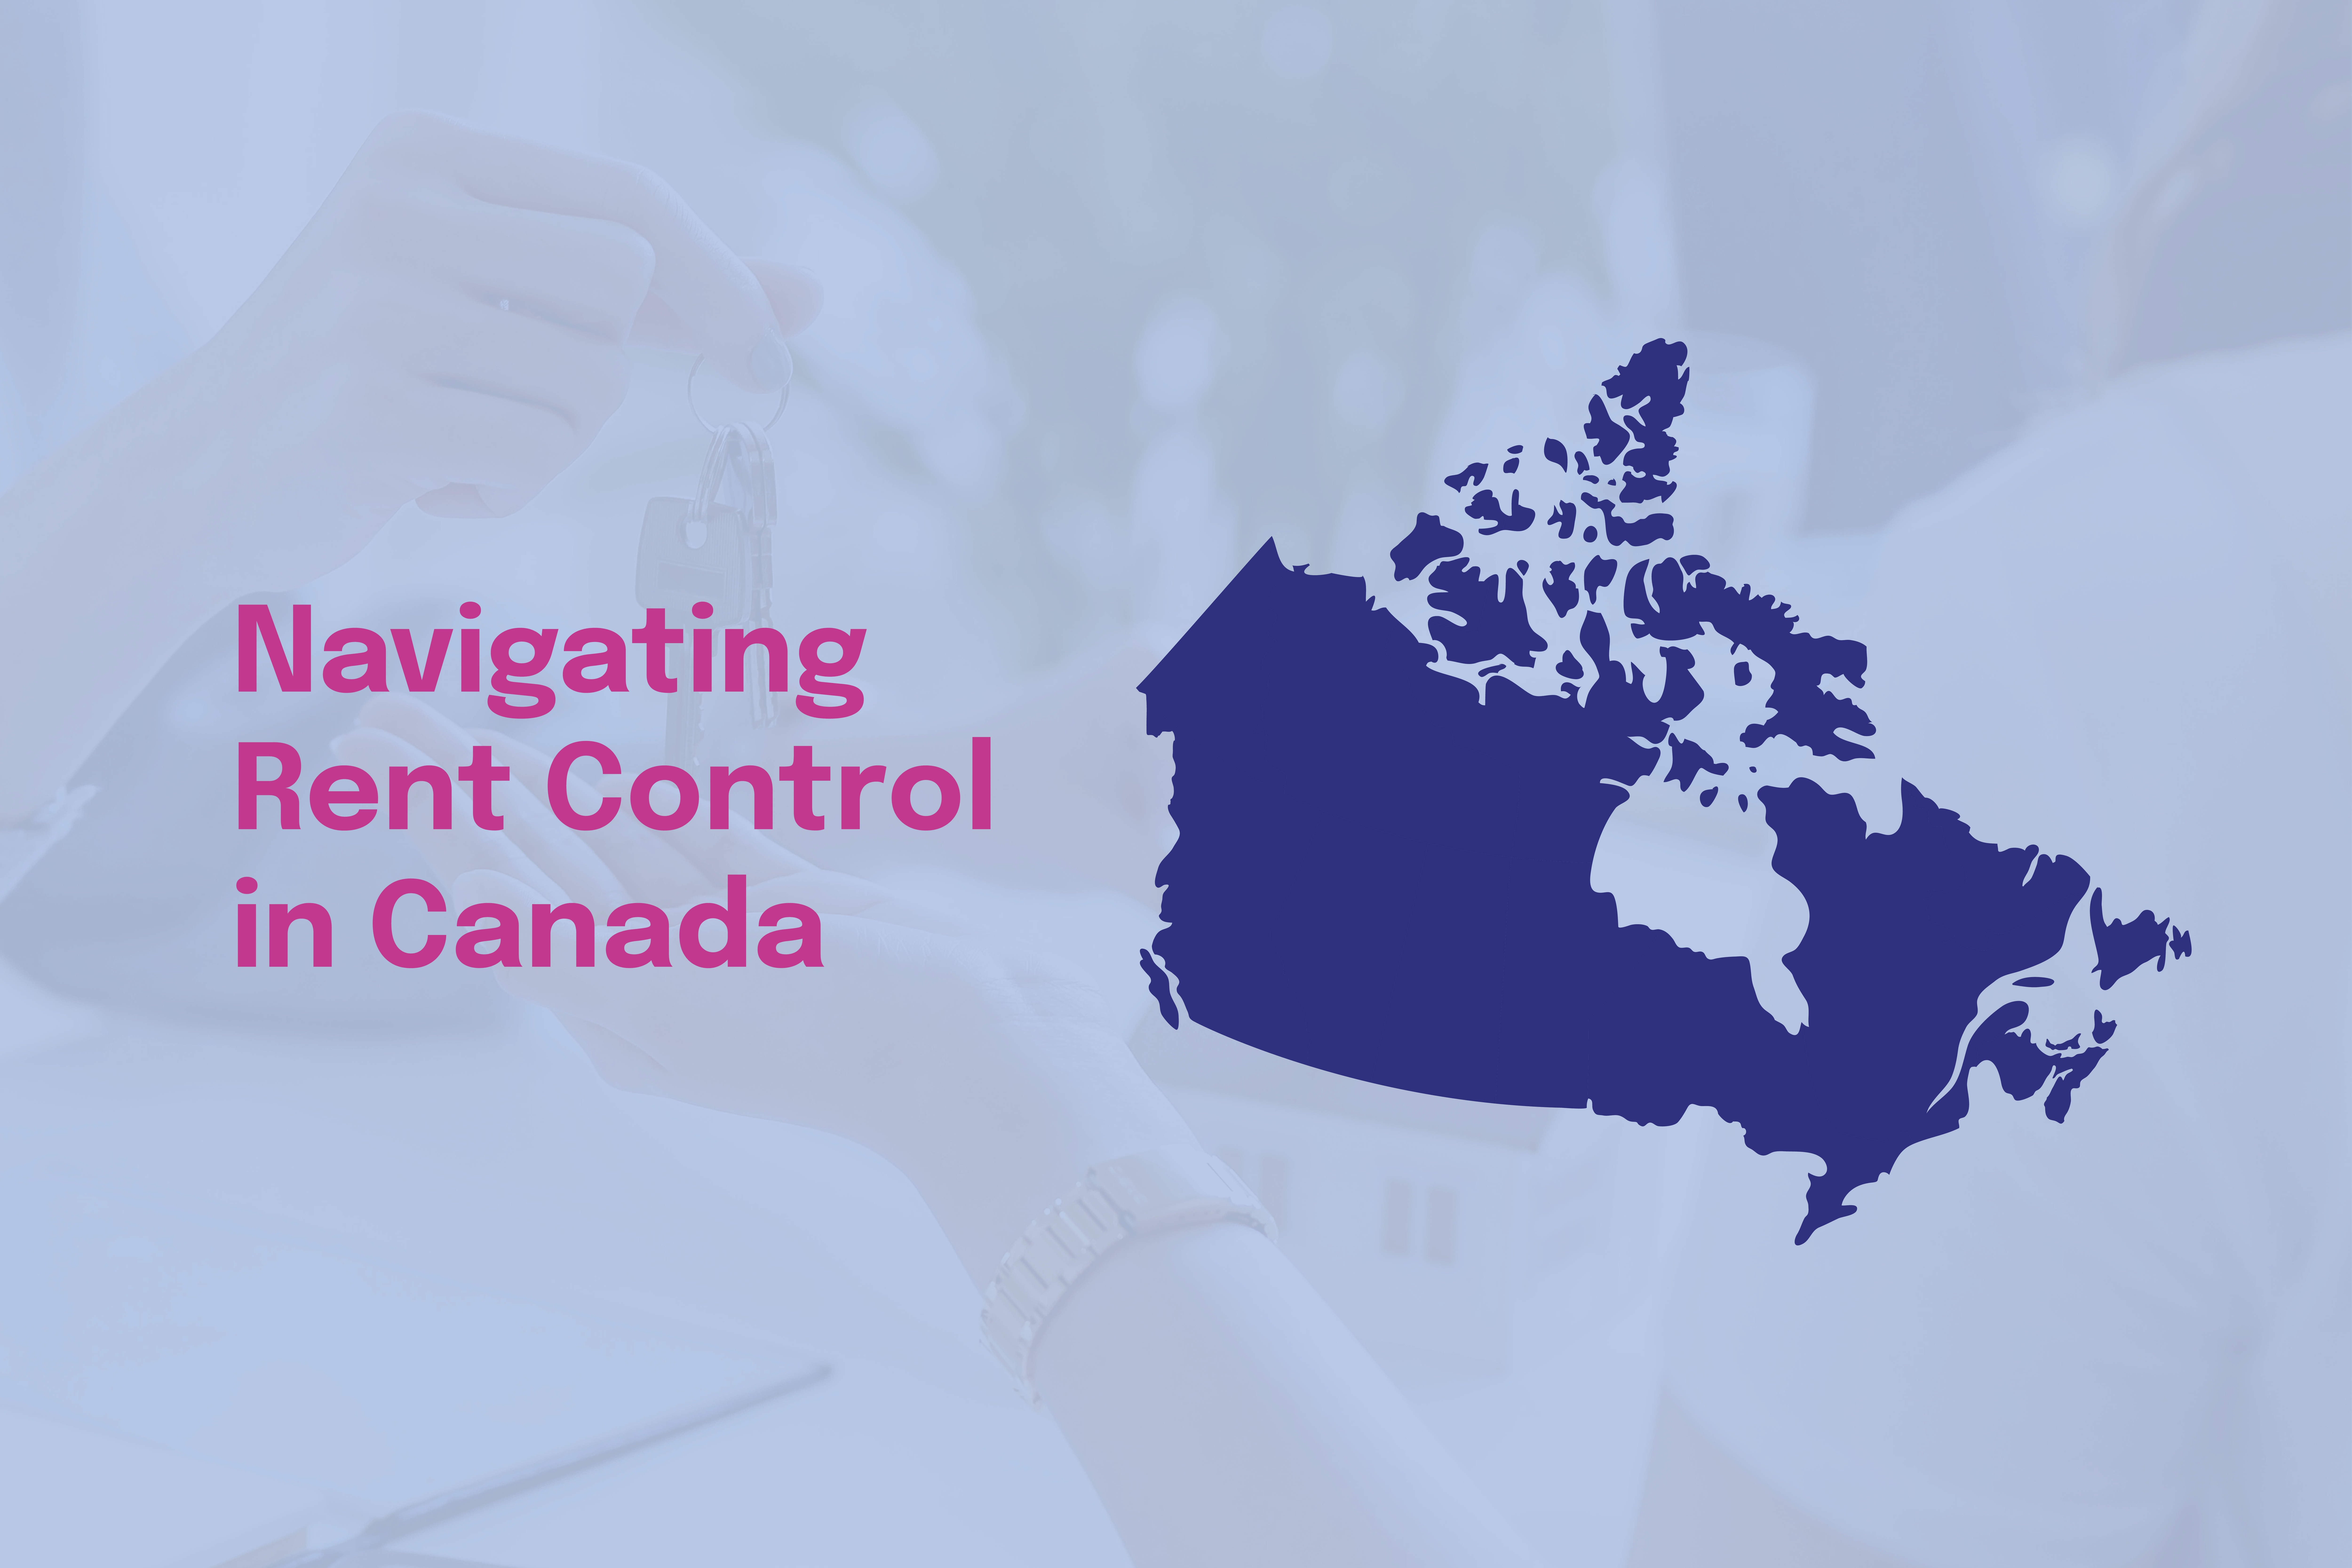 Navigating Rent Control in Canada: An Overview